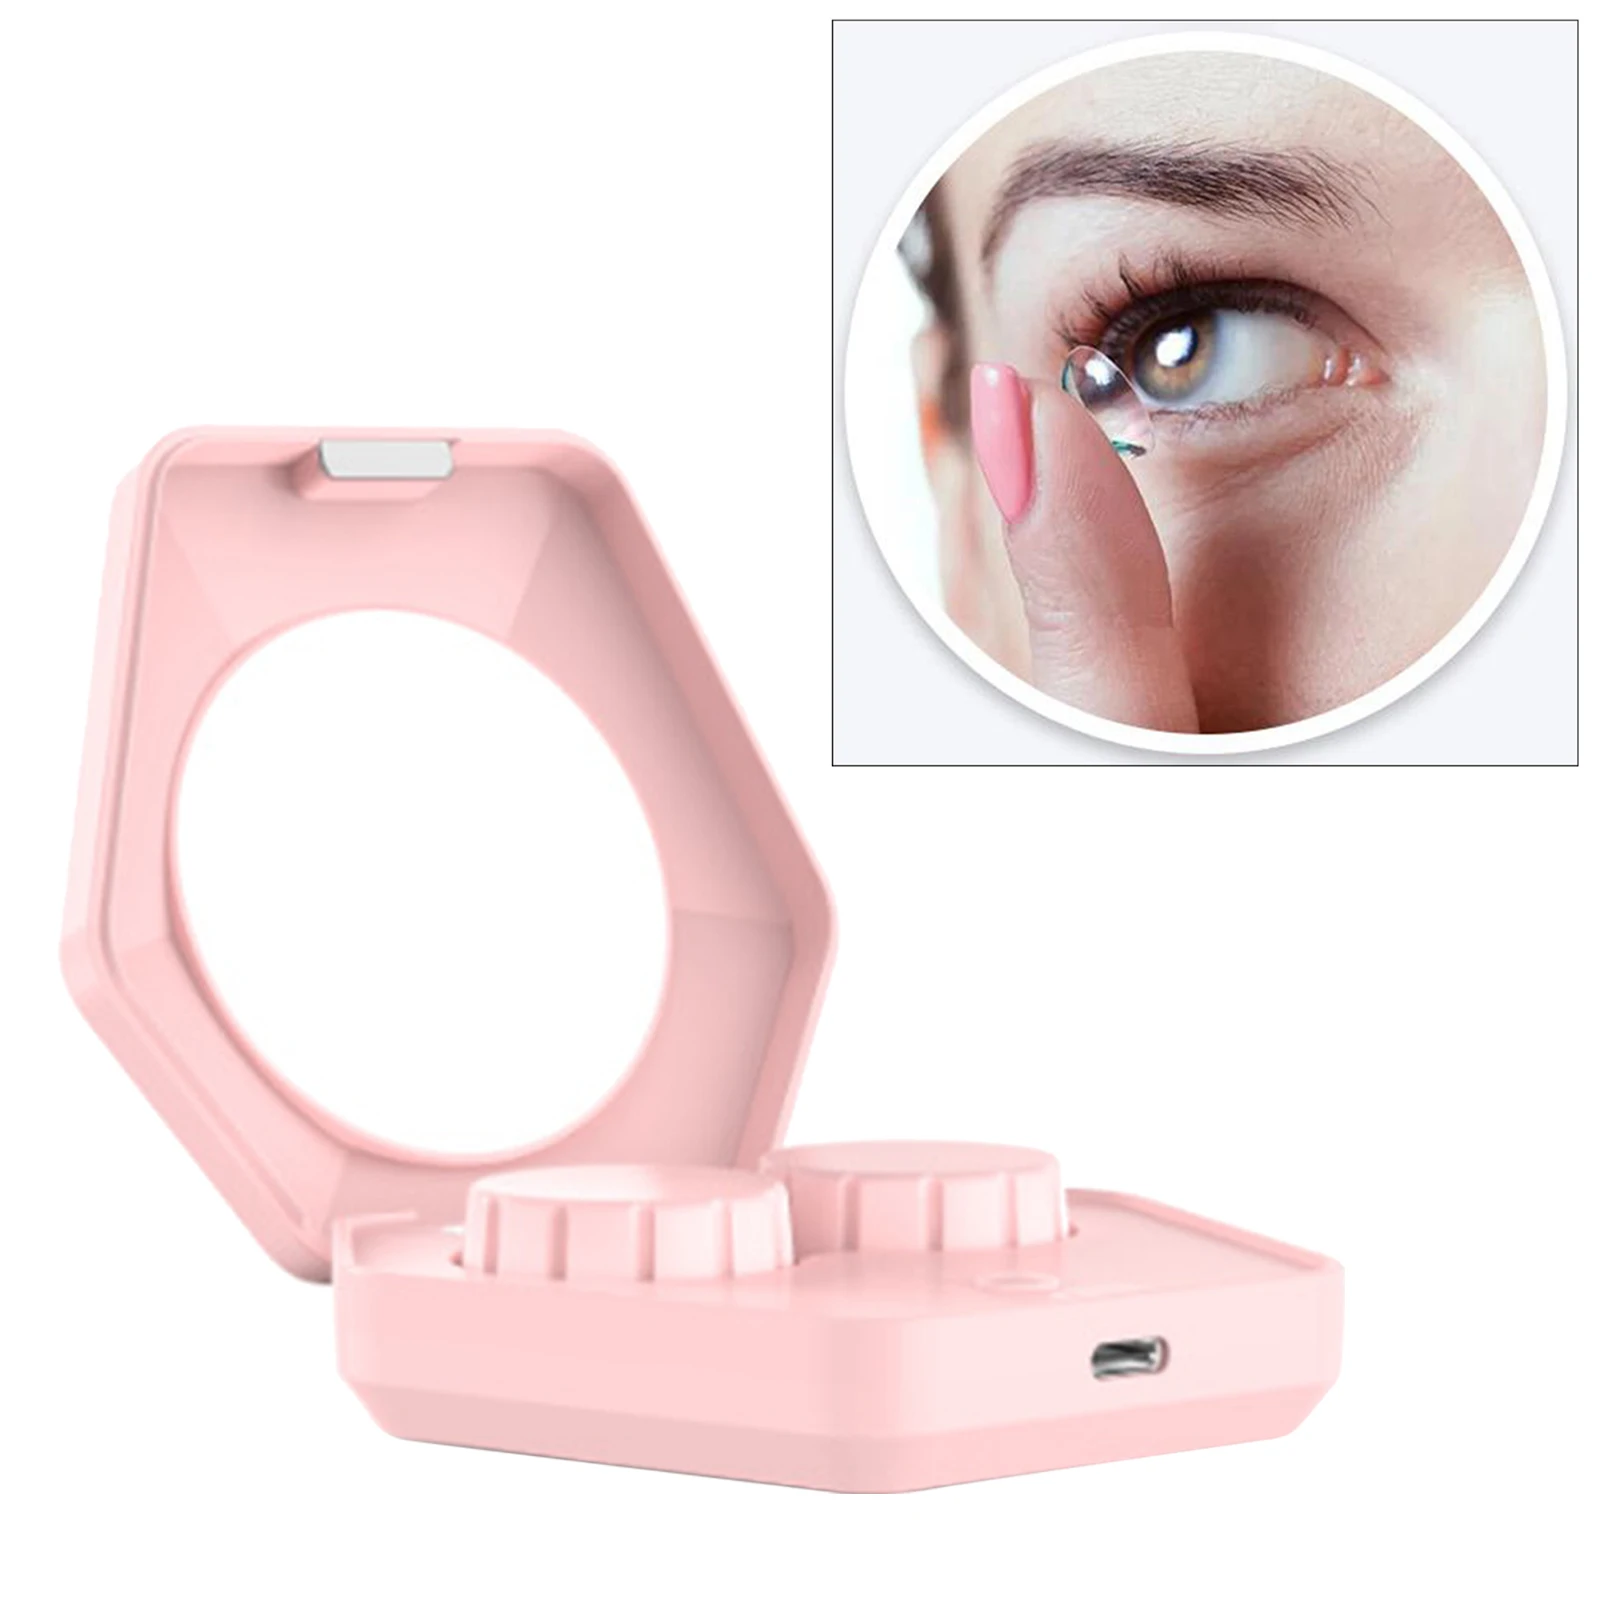 Mute Ultrasonic Contact Lens Cleaner Washer, USB Rechargeable, for Colored Contact Lens Daily Care Faster Cleaning